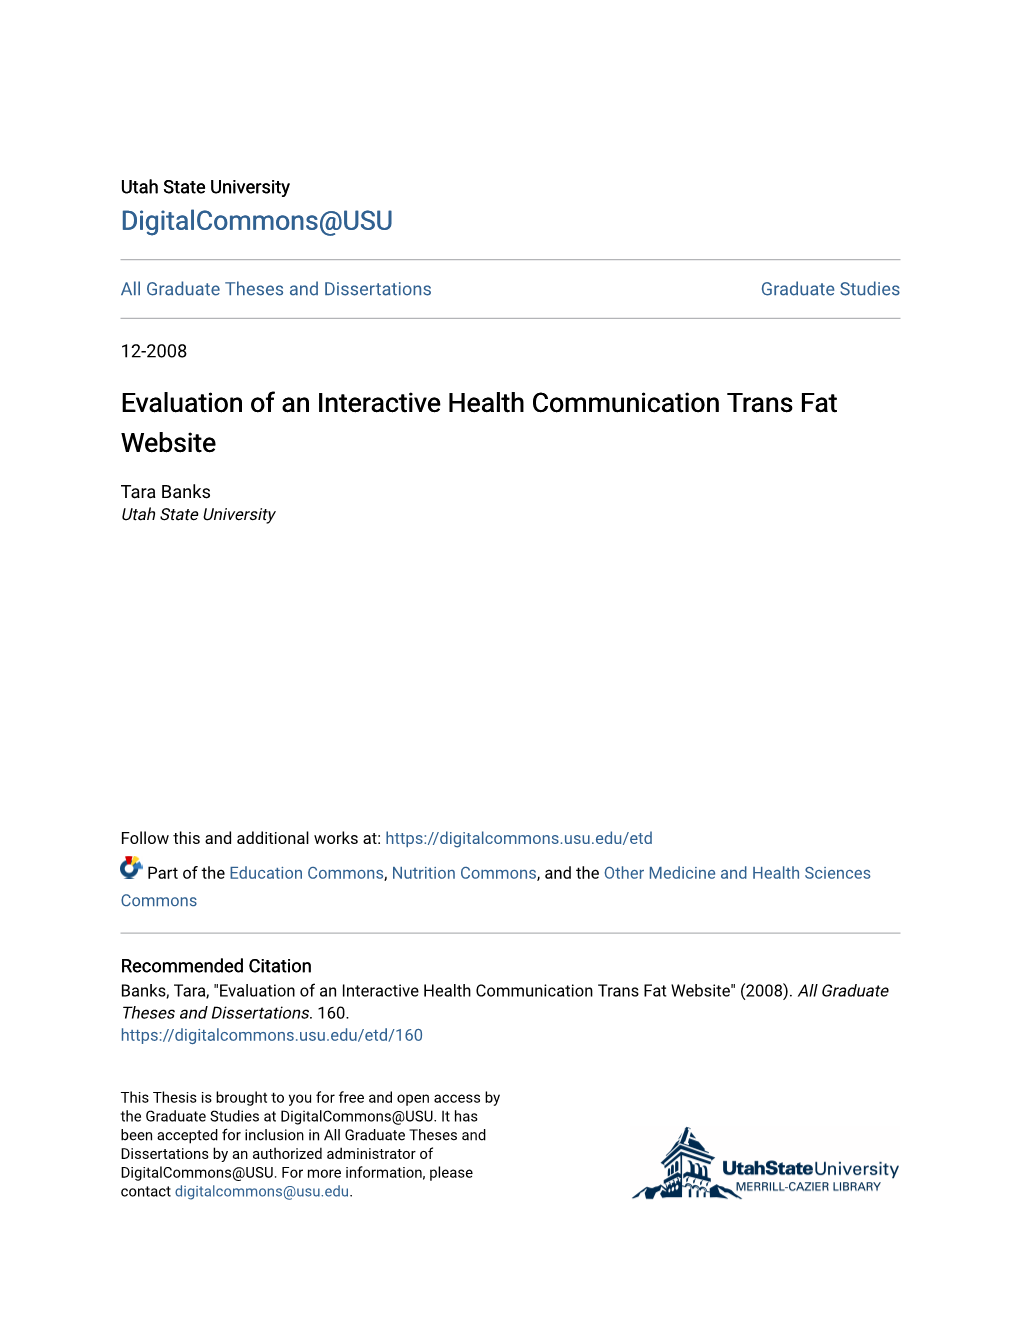 Evaluation of an Interactive Health Communication Trans Fat Website